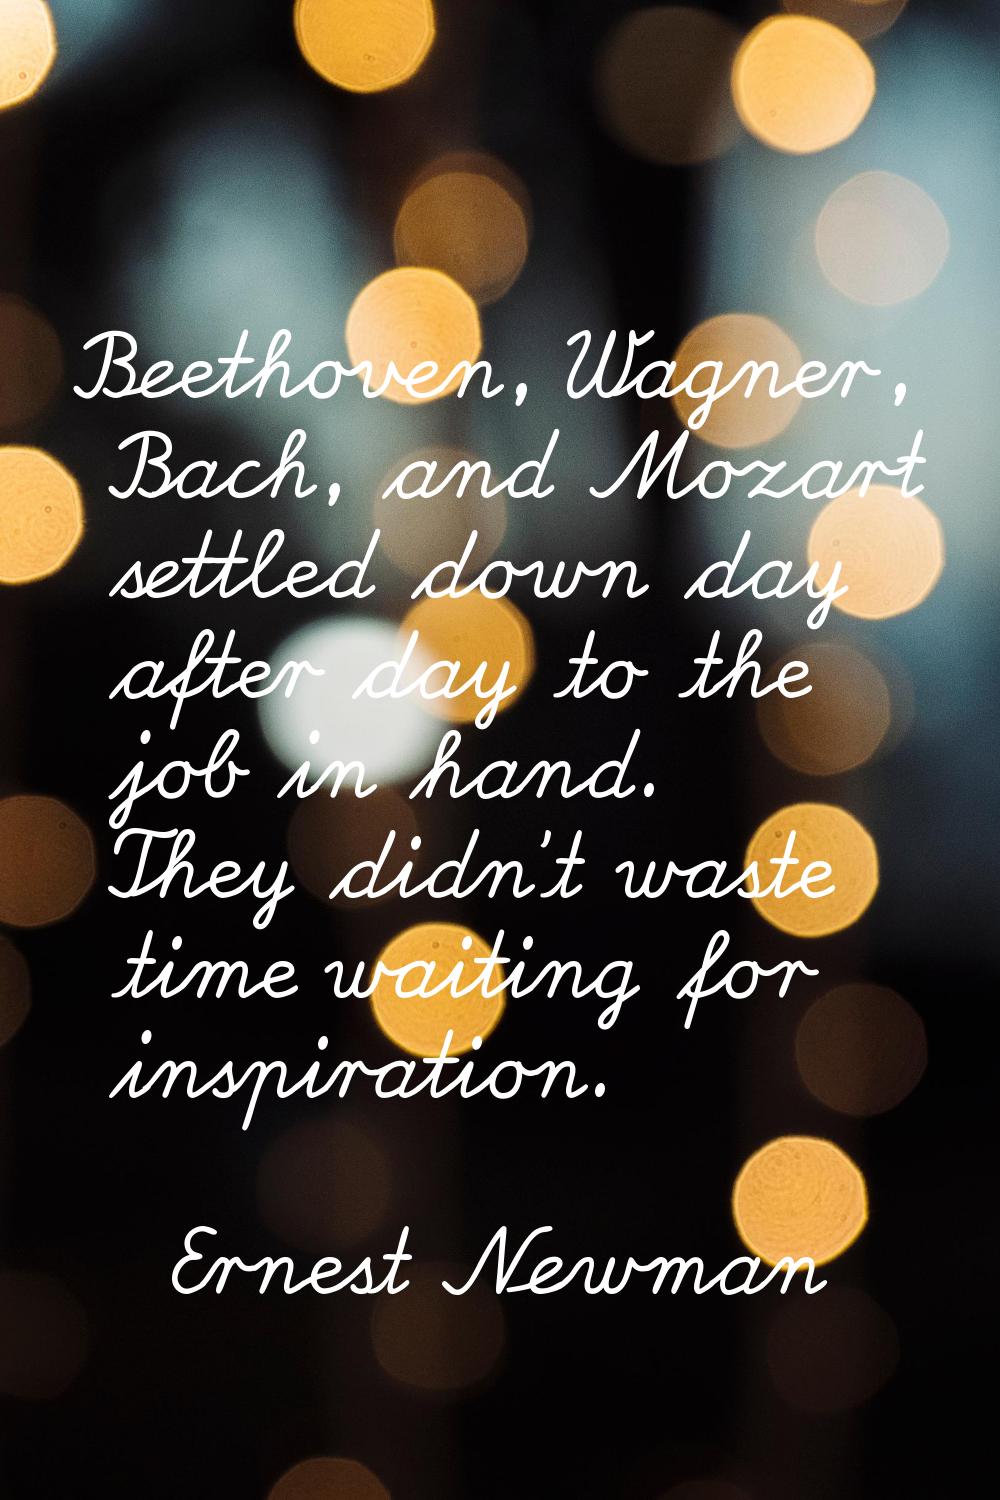 Beethoven, Wagner, Bach, and Mozart settled down day after day to the job in hand. They didn't wast